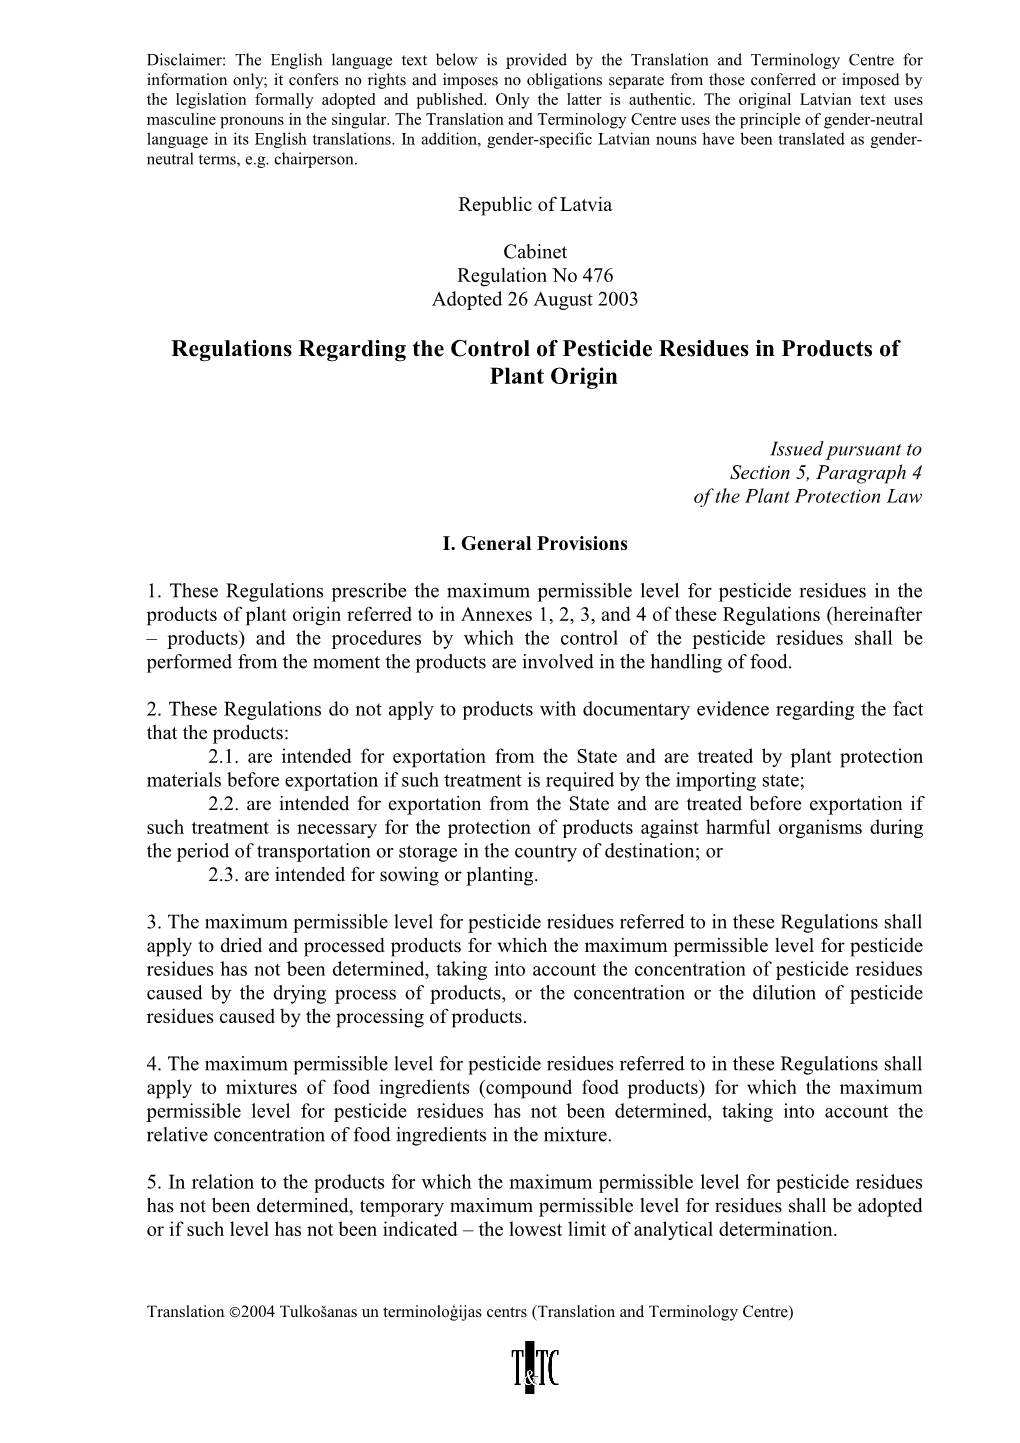 Regulations Regarding the Control of Pesticide Residues in Products of Plant Origin